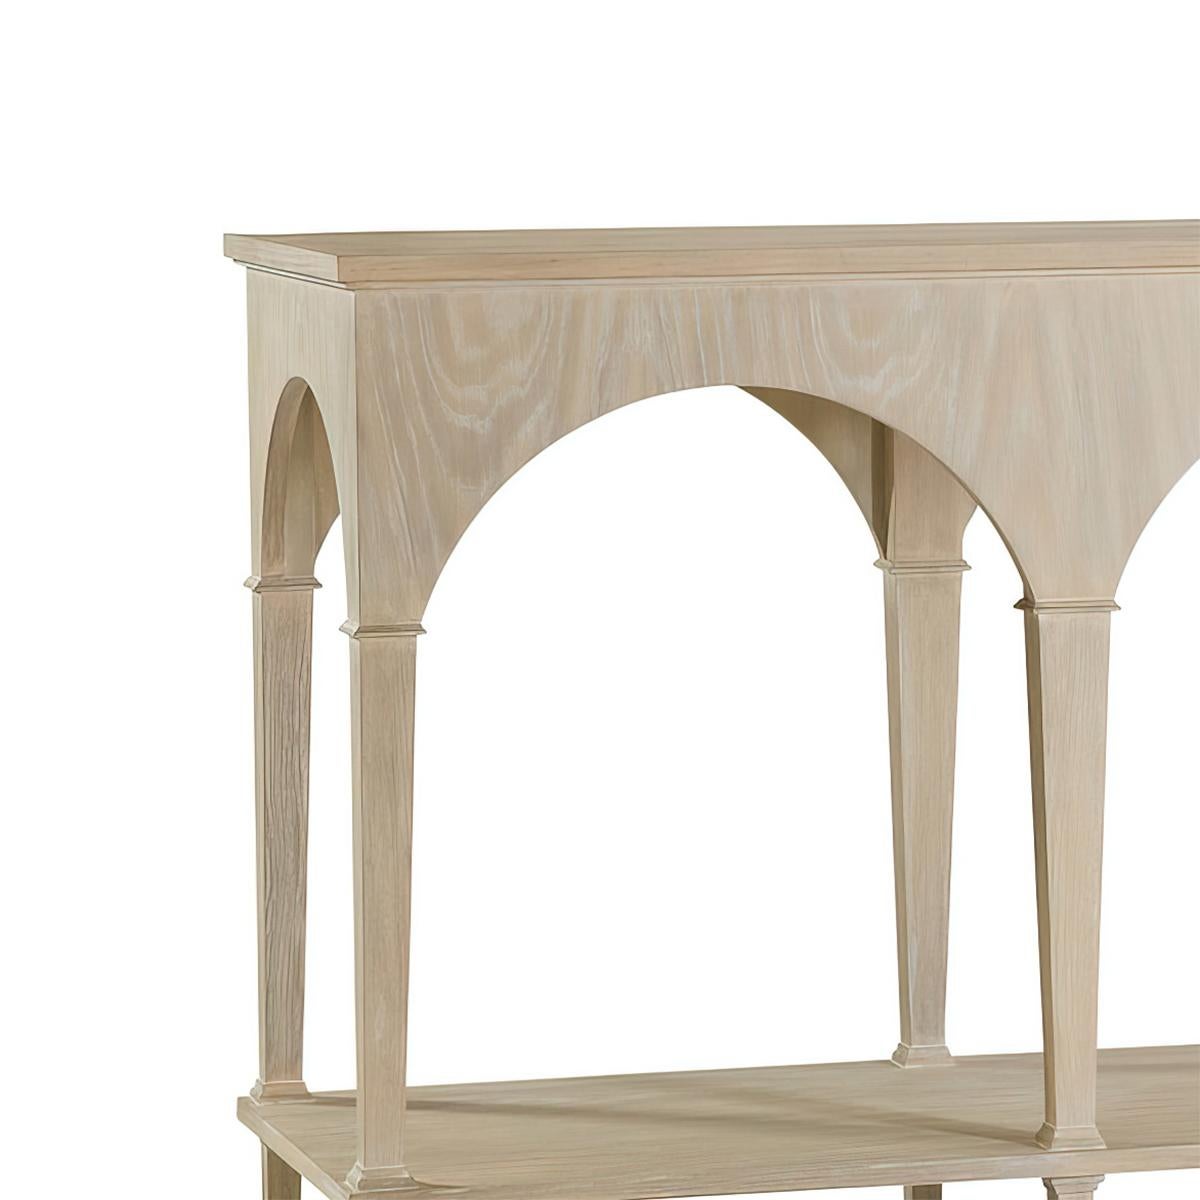 Vietnamese Light Modern Console Table For Sale